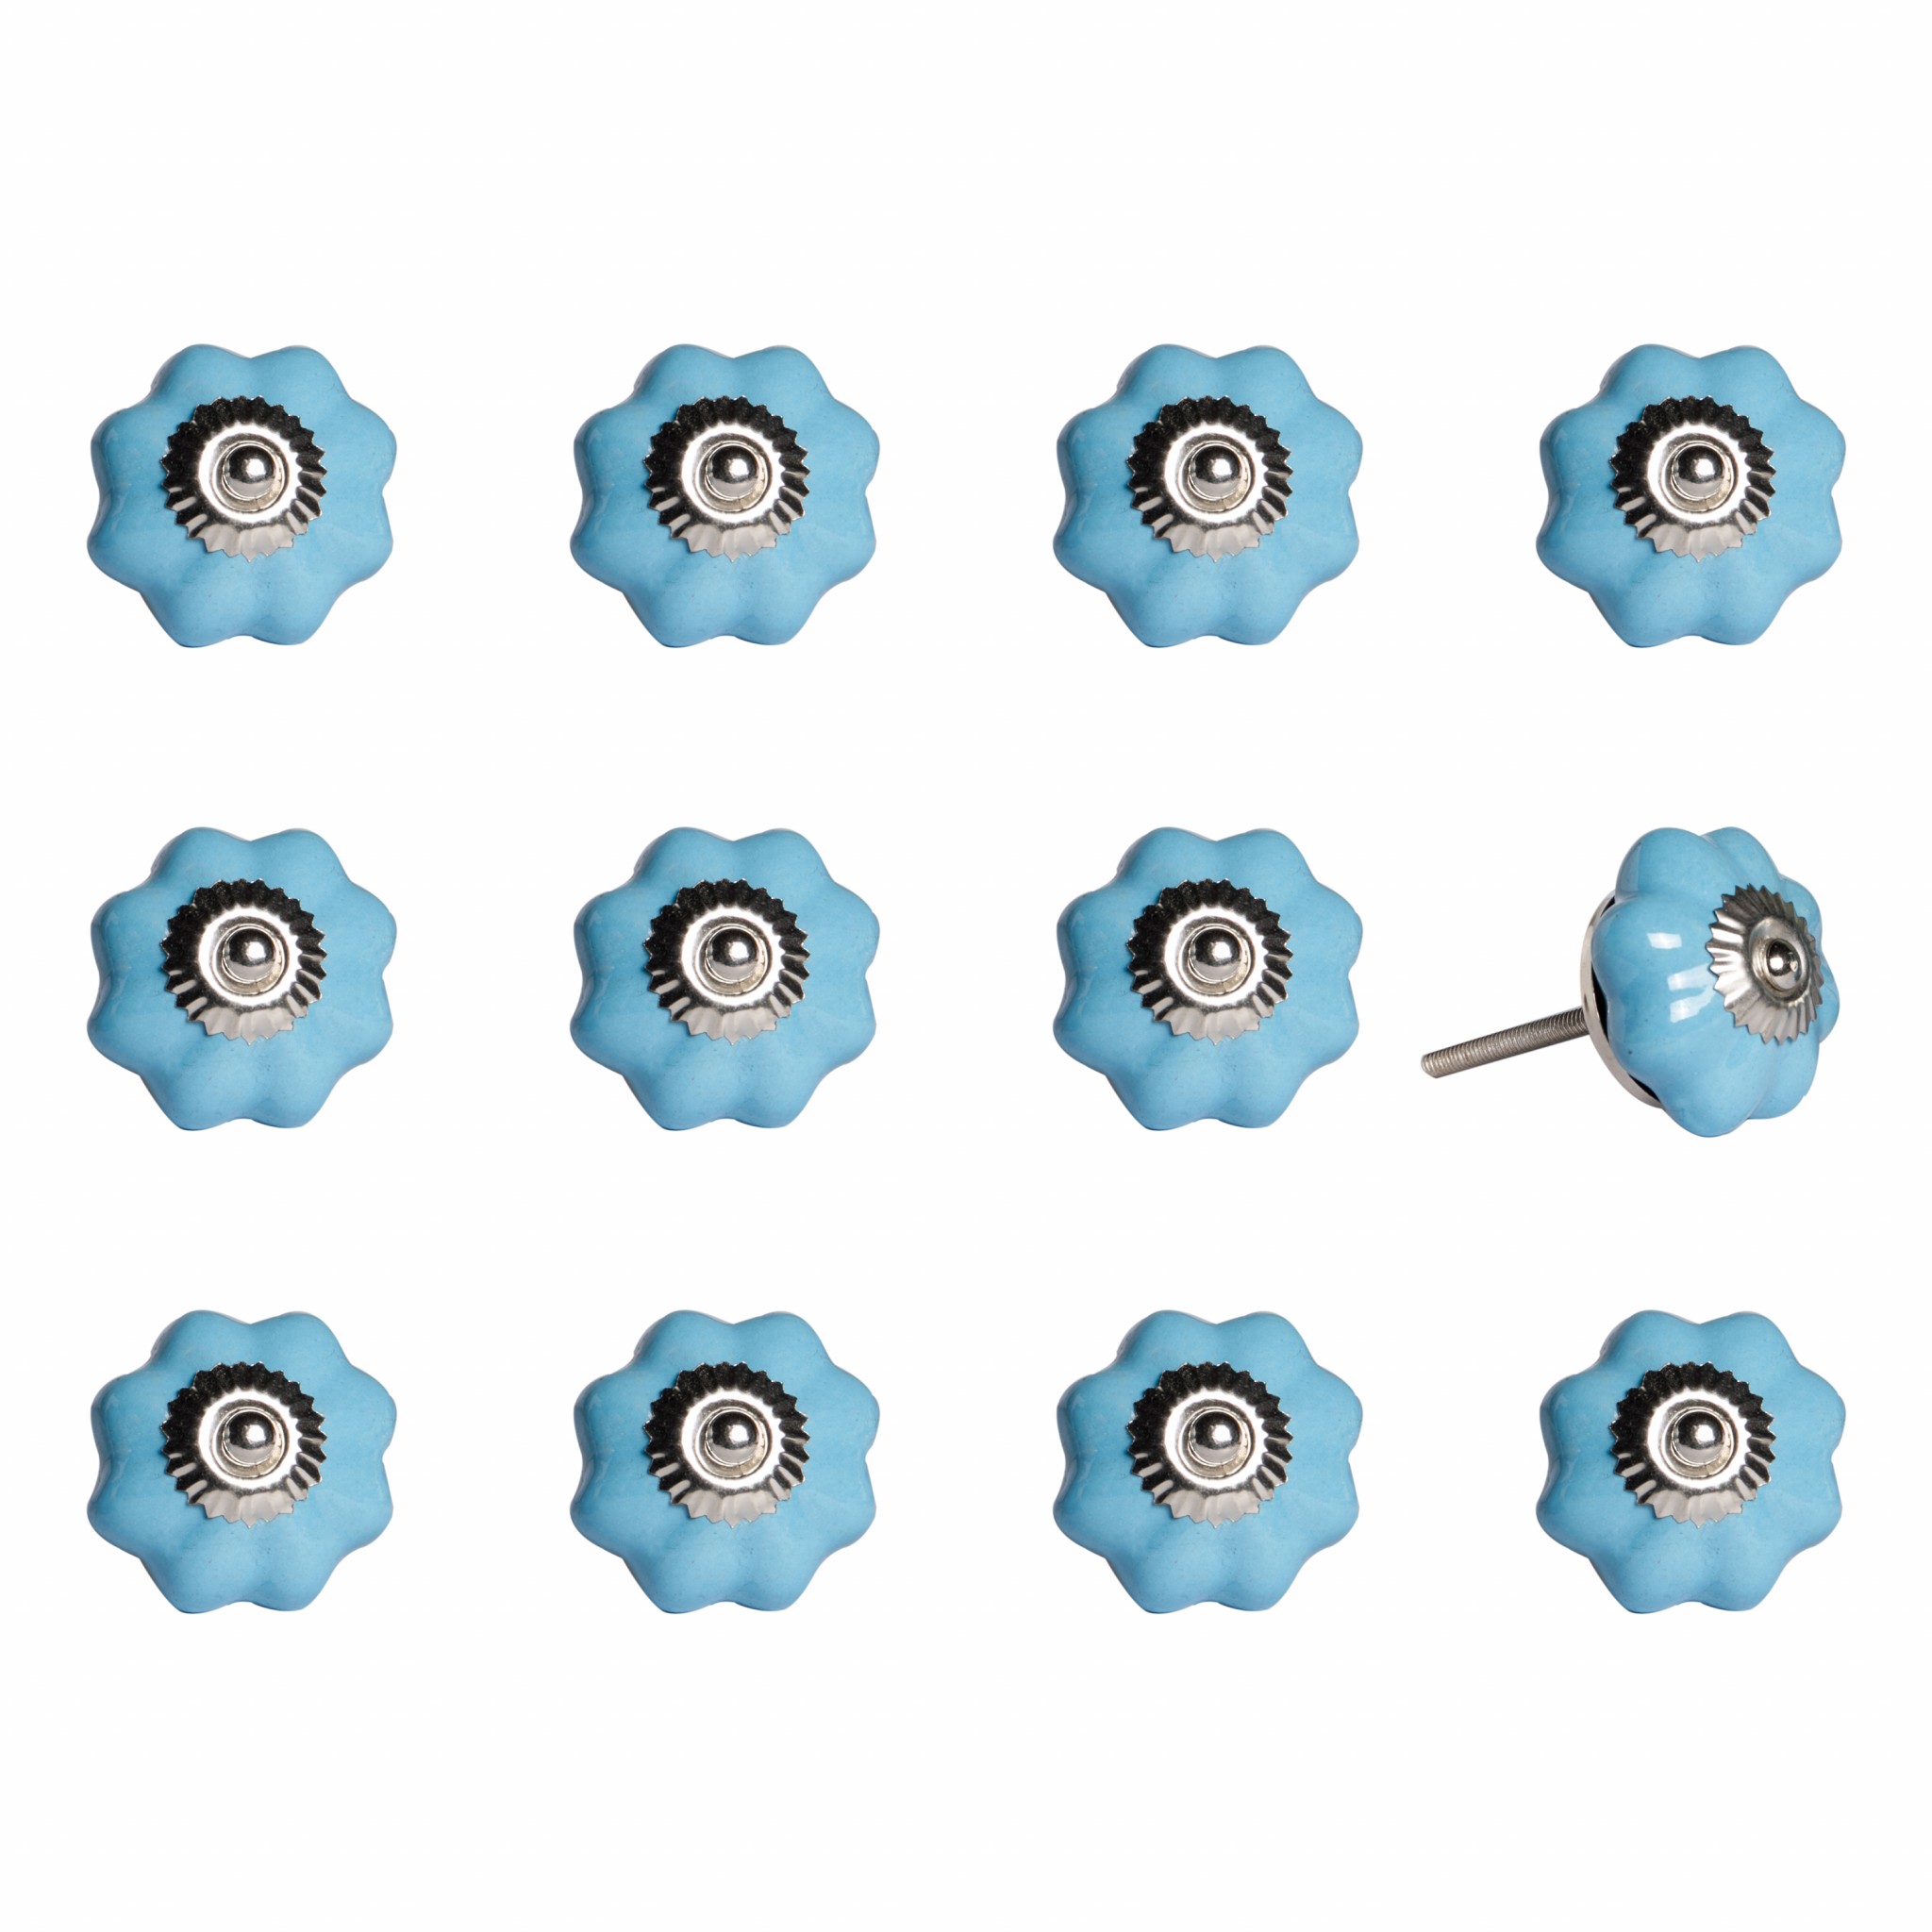 1.5" x 1.5" x 1.5" Light Blue and Silver - Knobs 12-Pack